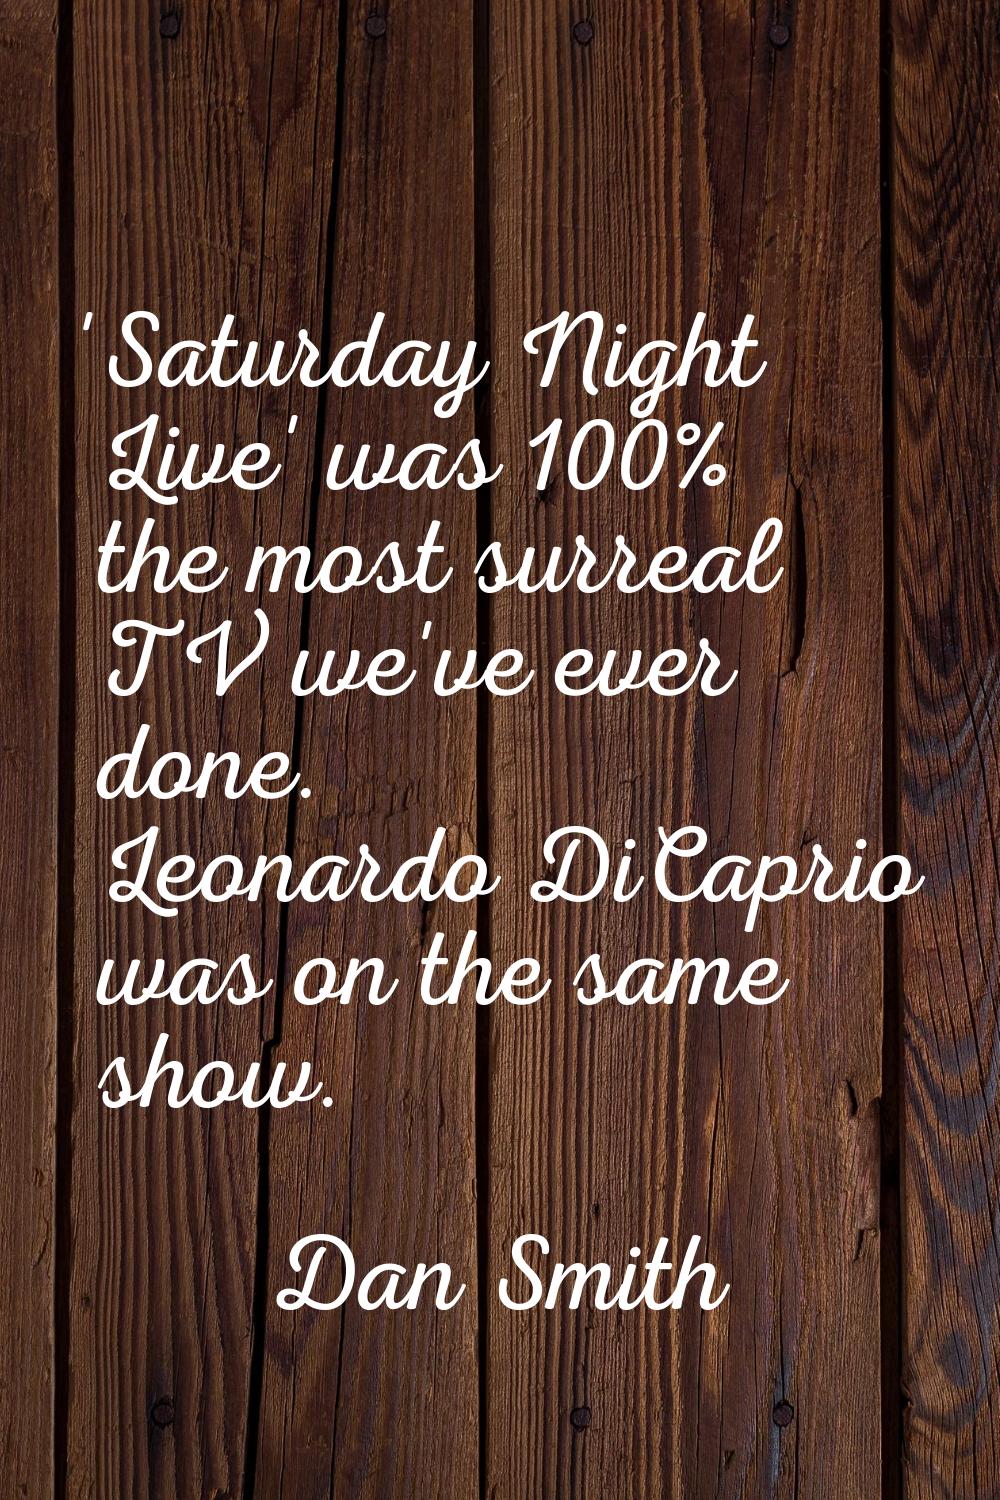 'Saturday Night Live' was 100% the most surreal TV we've ever done. Leonardo DiCaprio was on the sa